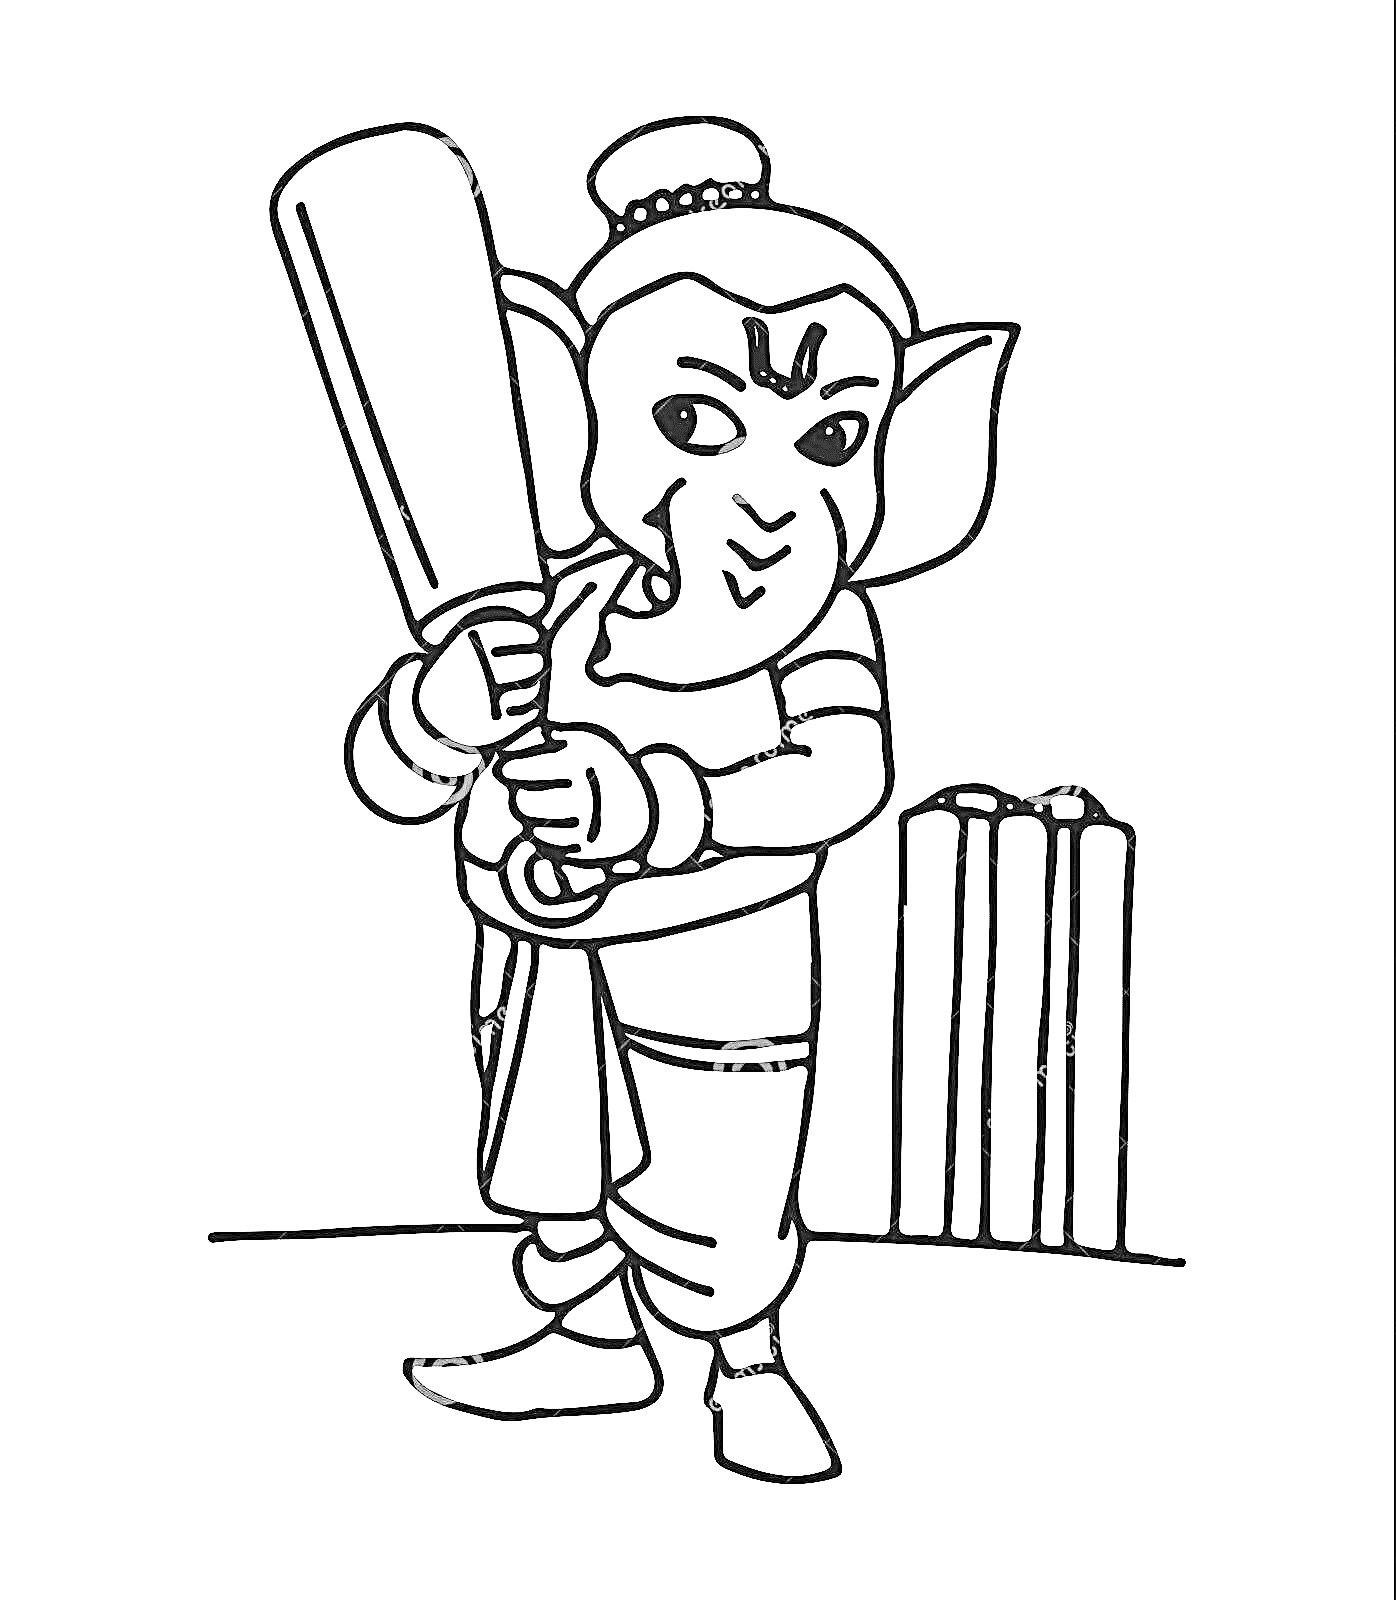 Elephant Cricket Coloring Page